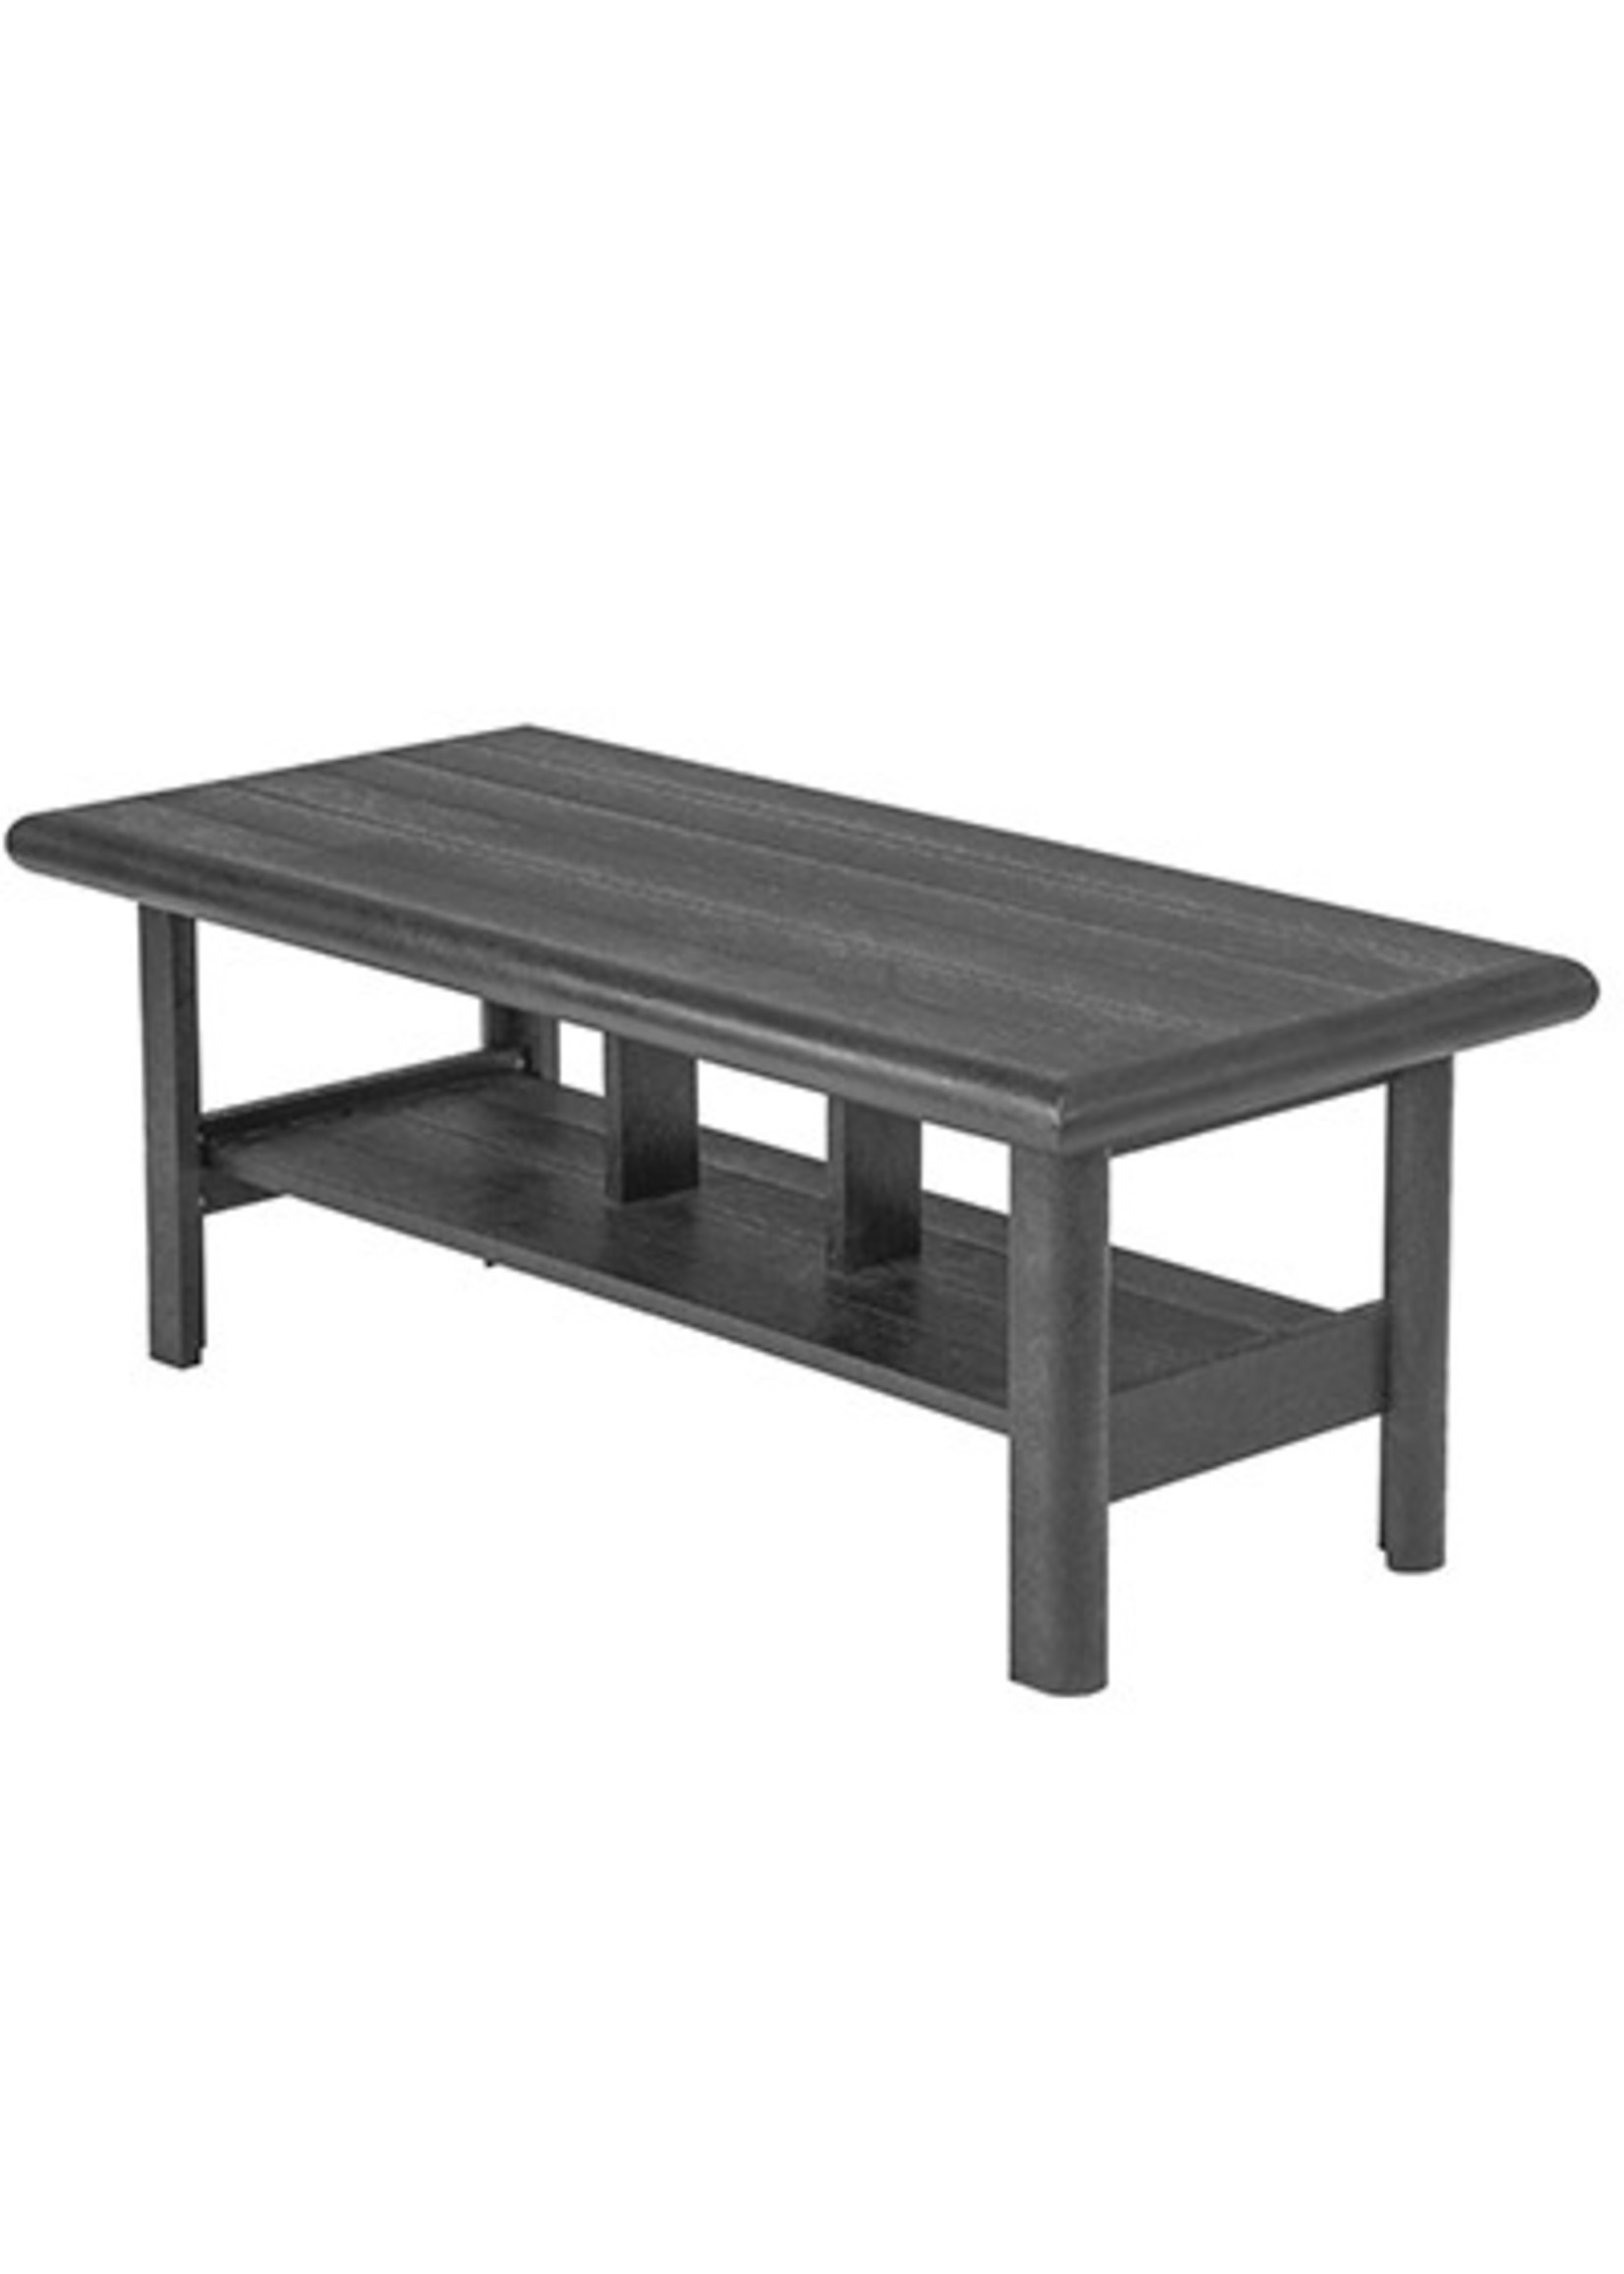 C.R. Plastic Products DST267 * Stratford 49" Coffee Table,